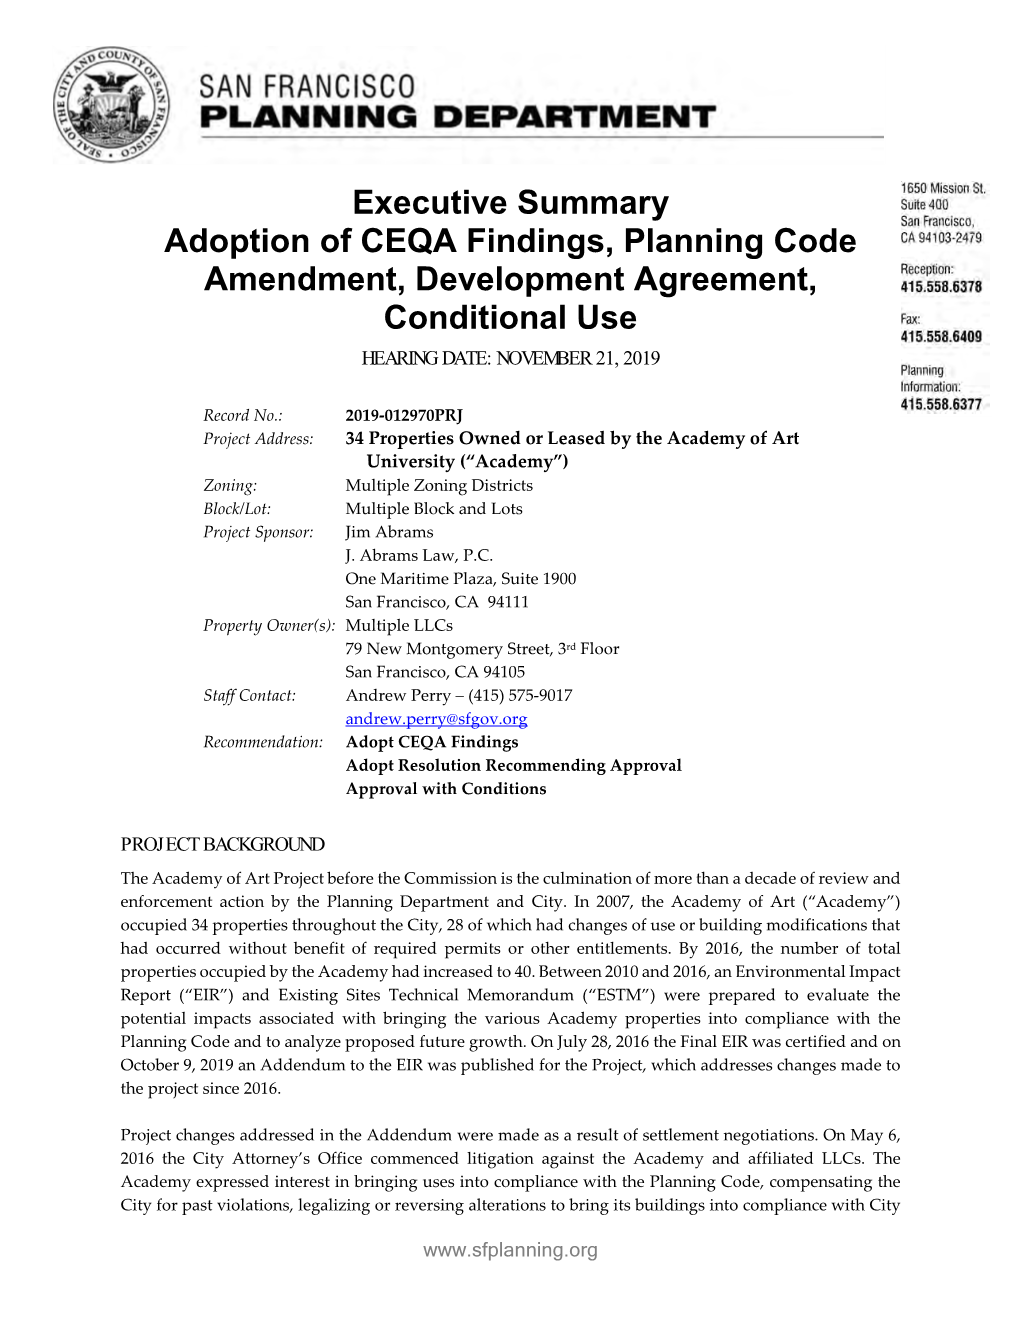 Executive Summary Adoption of CEQA Findings, Planning Code Amendment, Development Agreement, Conditional Use HEARING DATE: NOVEMBER 21, 2019